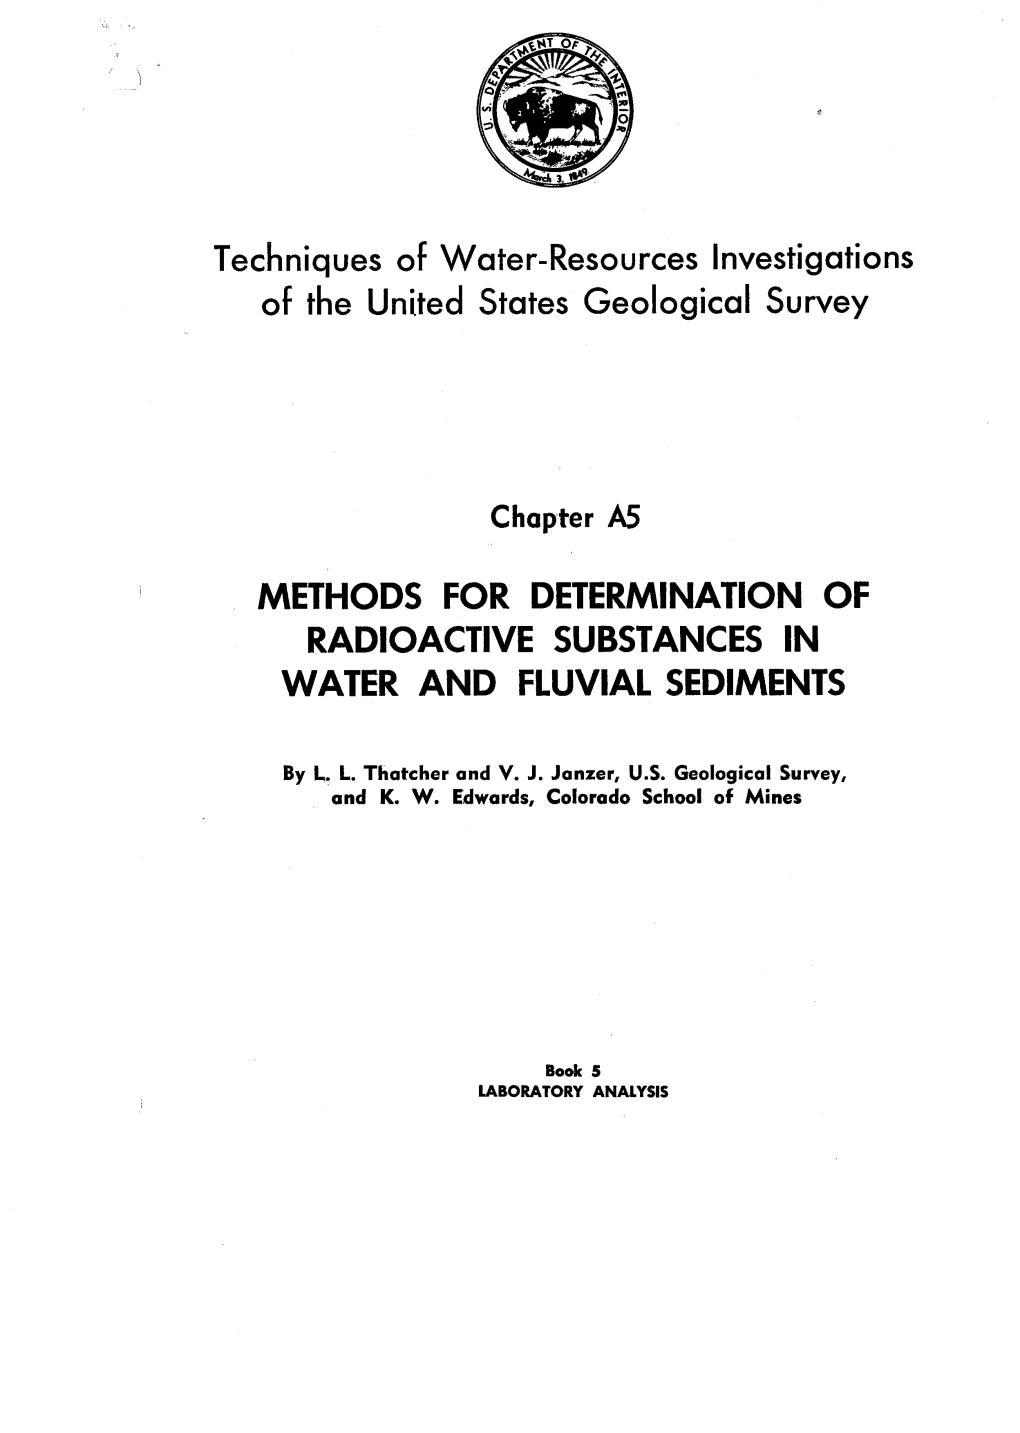 Methods for Determination of Radioactive Substances in Water and Fluvial Sediments